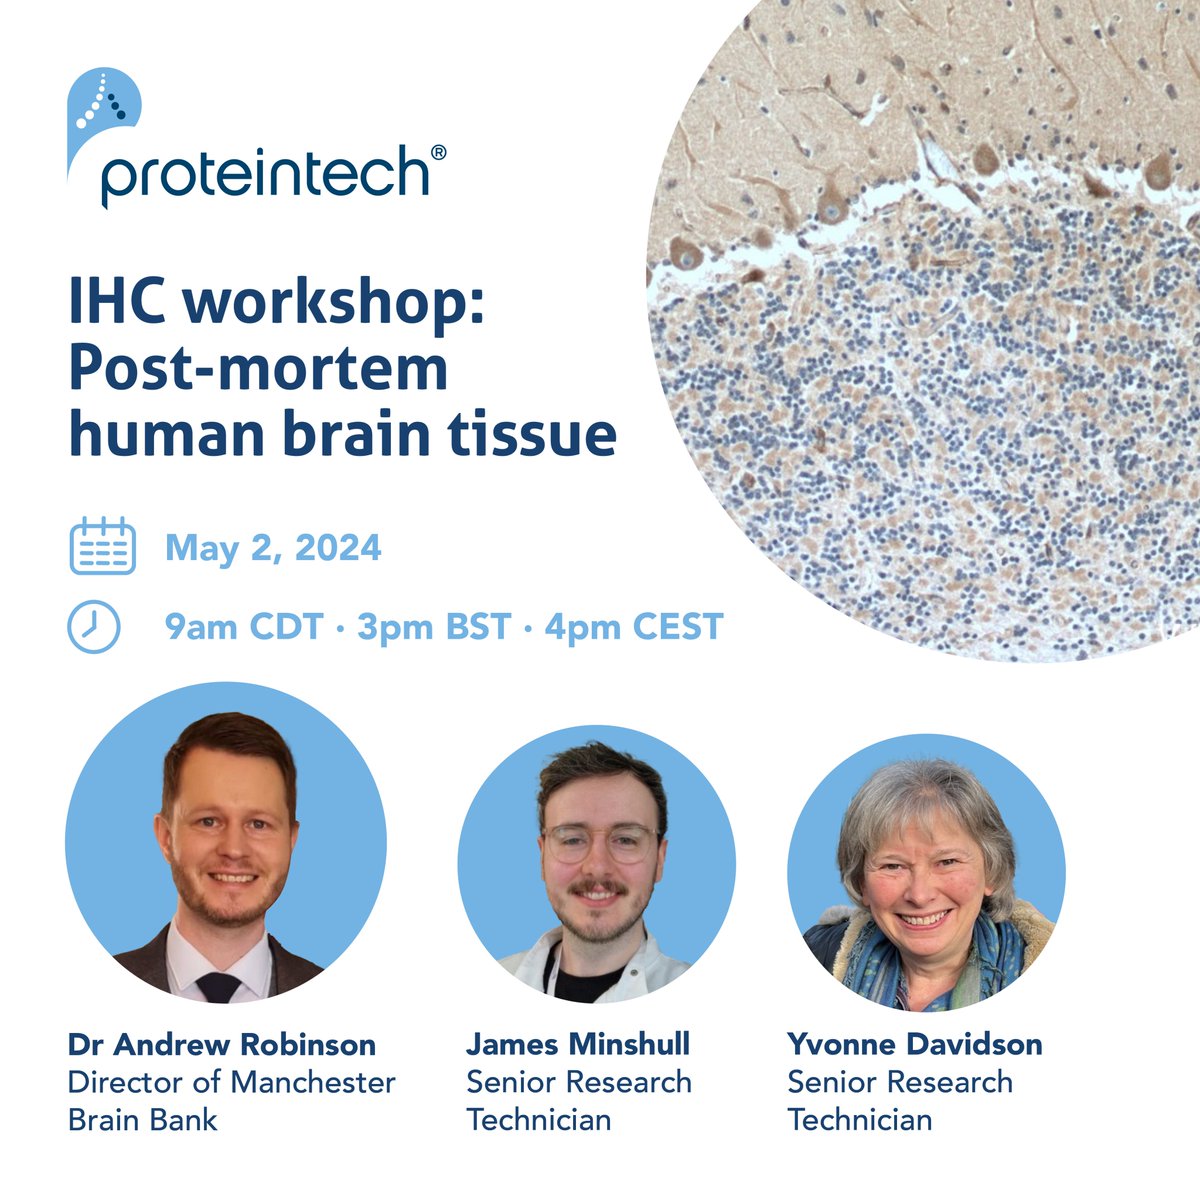 Registration is open for our ‘IHC workshop: Post-mortem human brain tissue’ 📆 May 2nd 2024 ⏰ 9am CDT · 3pm BST · 4pm CEST 🖥 Via Zoom Register early to secure your free place: ptglab.zoom.us/webinar/regist… @MancBrainBank #ProteintechEvents #Immunohistochemistry #Neuroscience